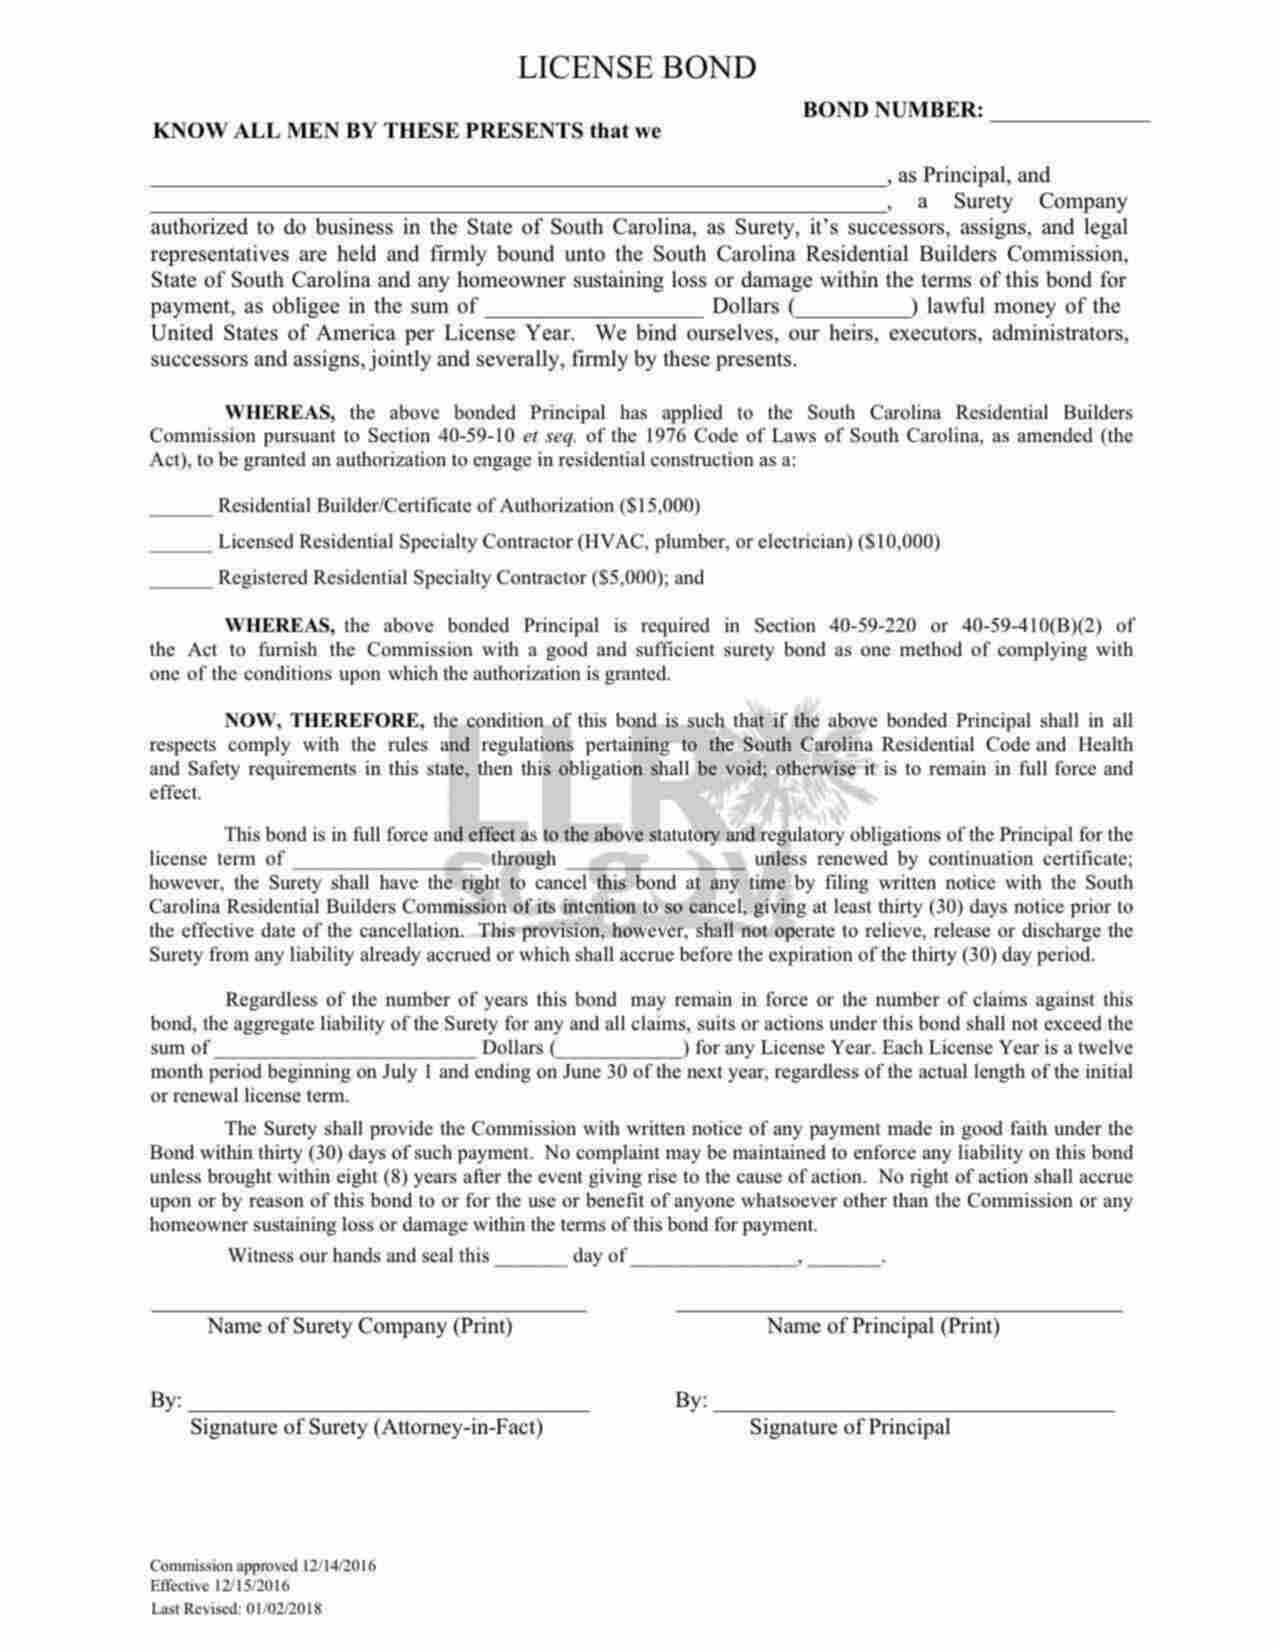 South Carolina Registered Residential Specialty Contractor Bond Form